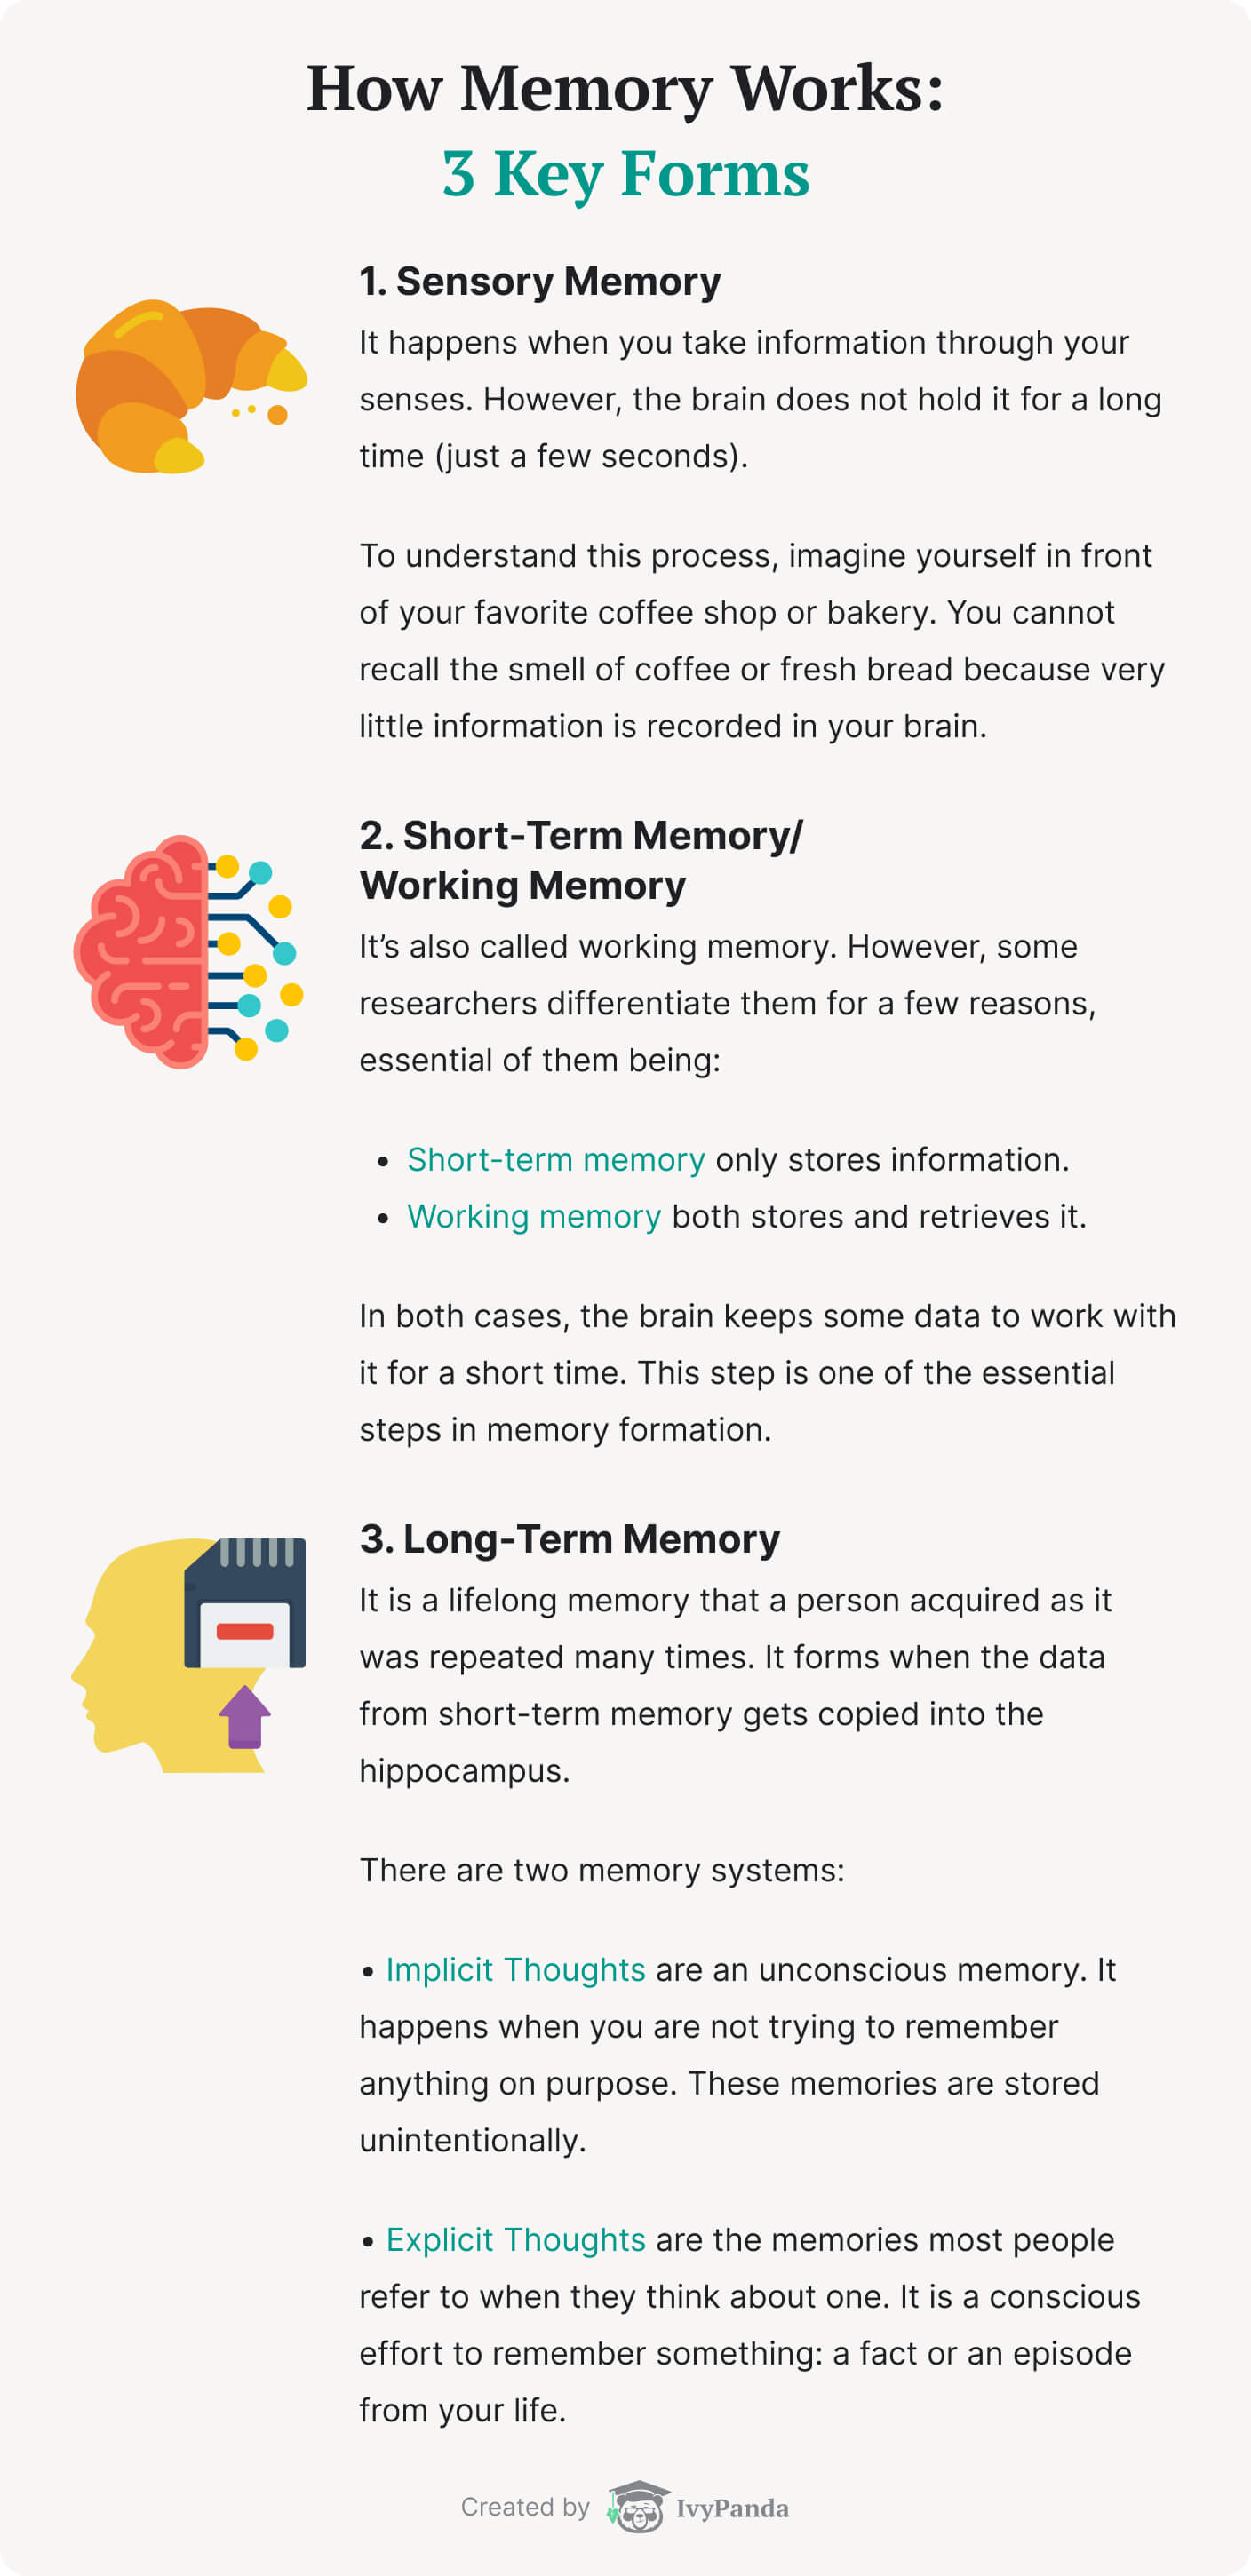 Long-term memory is formed immediately without the need for